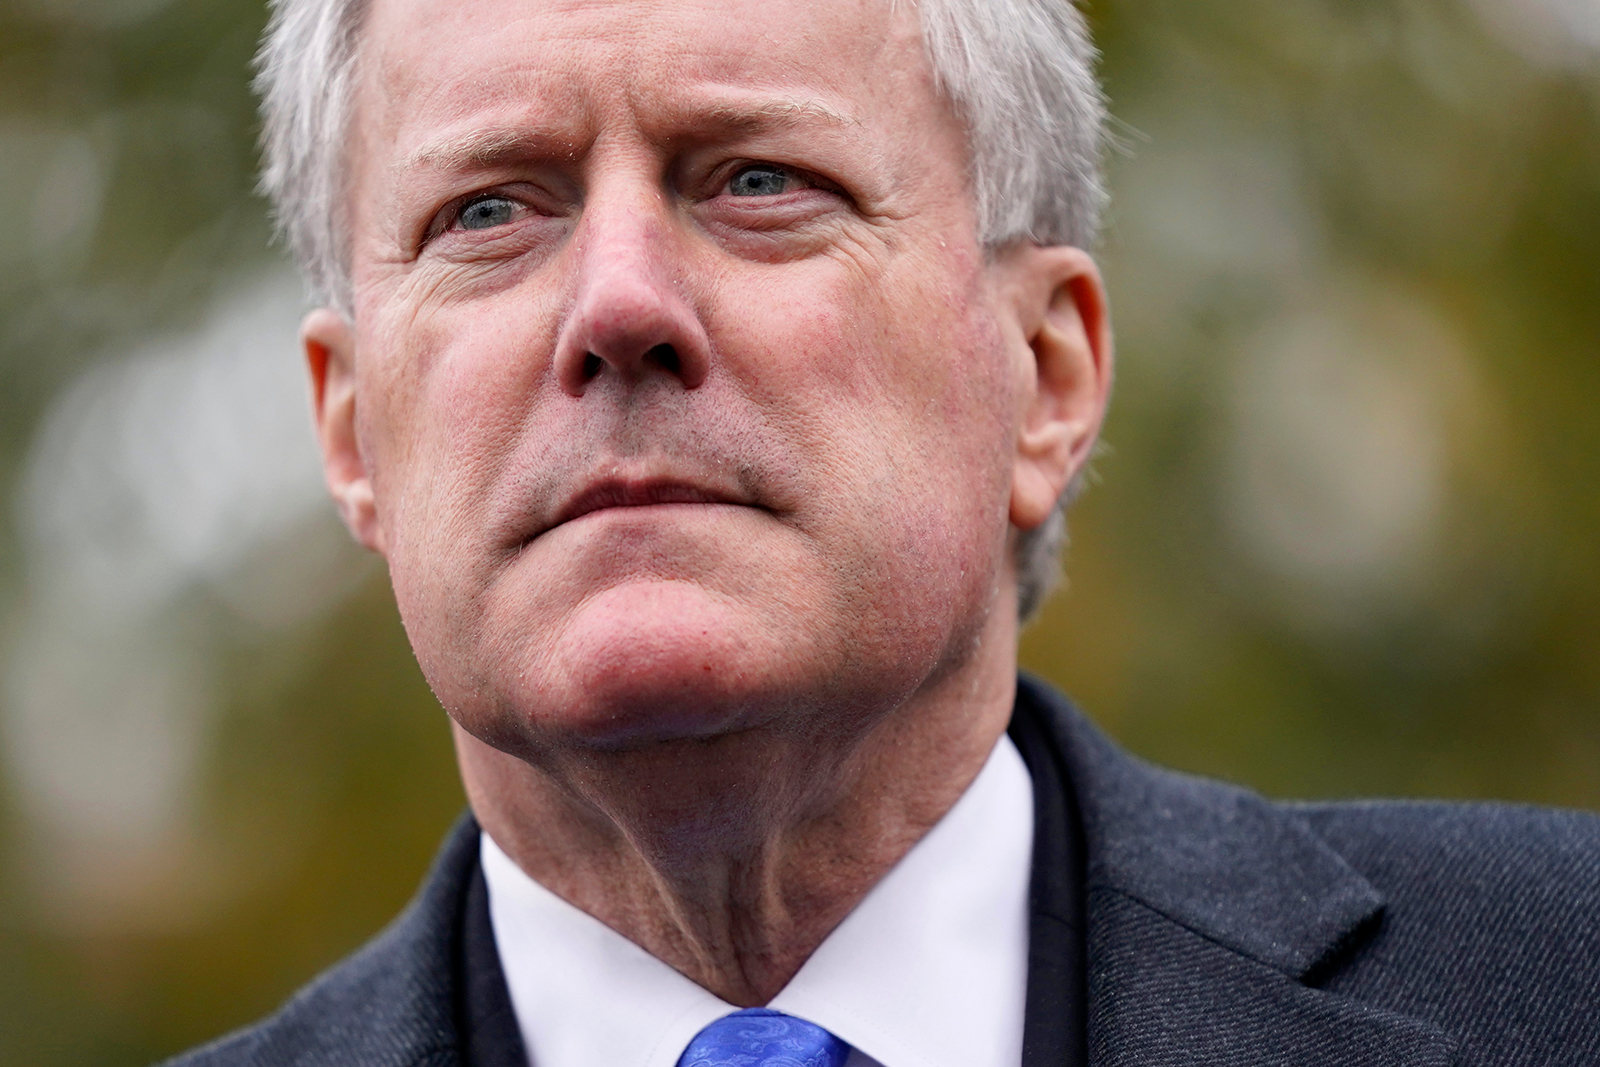 Former White House Chief of Staff Mark Meadows speaks to reporters outside the White House, October 26, 2020, in Washington.  (Patrick Semansky / AP)